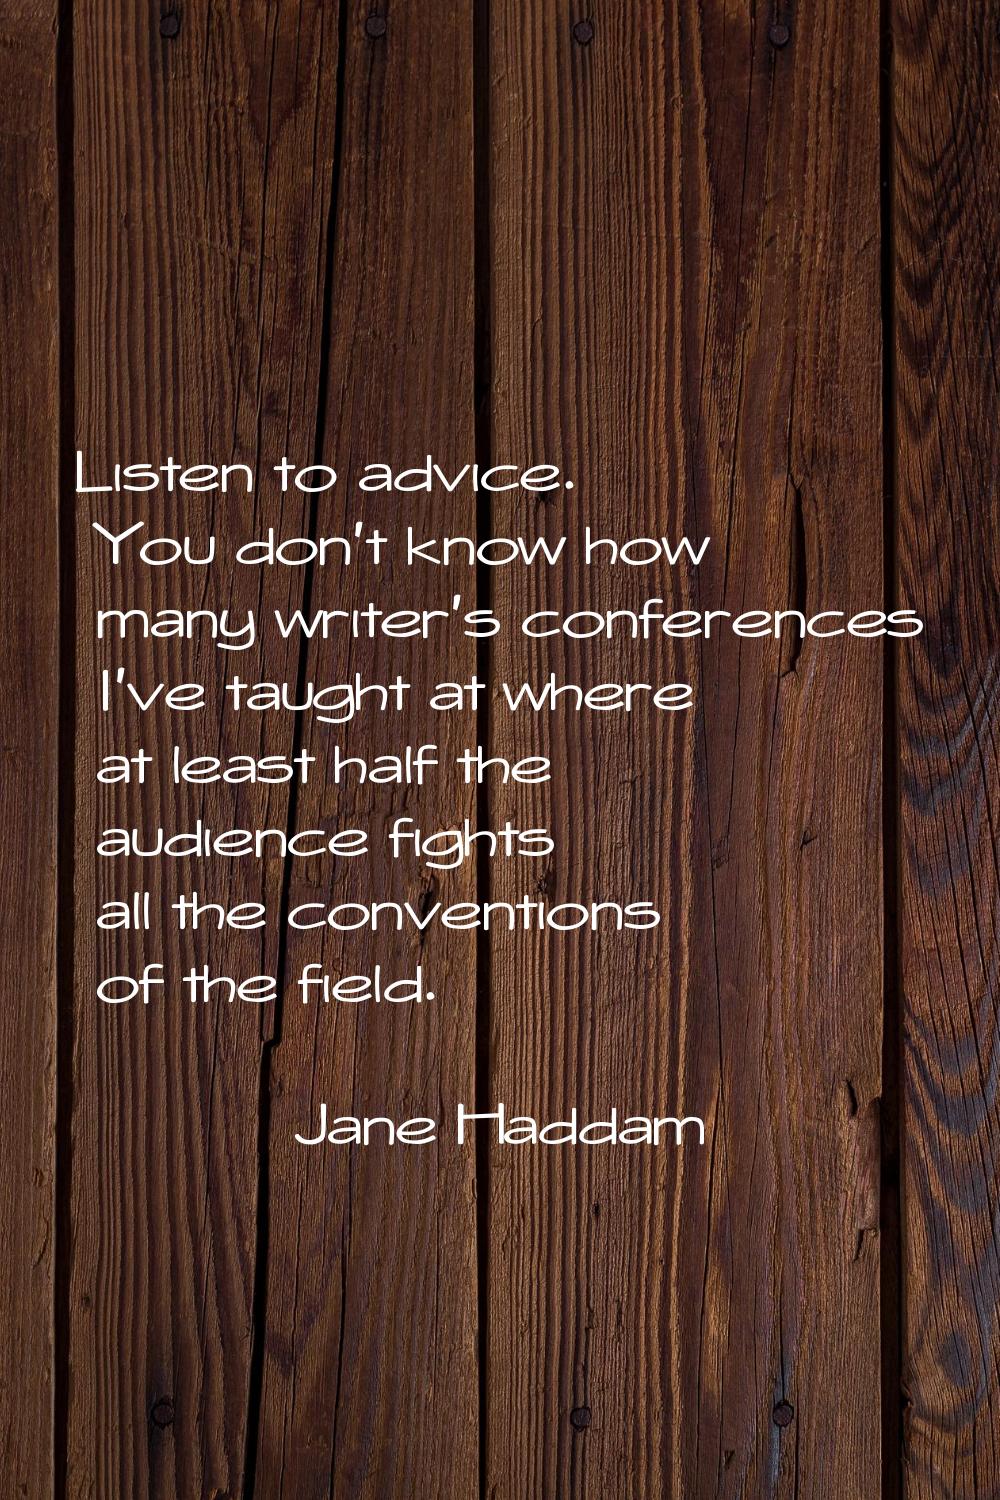 Listen to advice. You don't know how many writer's conferences I've taught at where at least half t